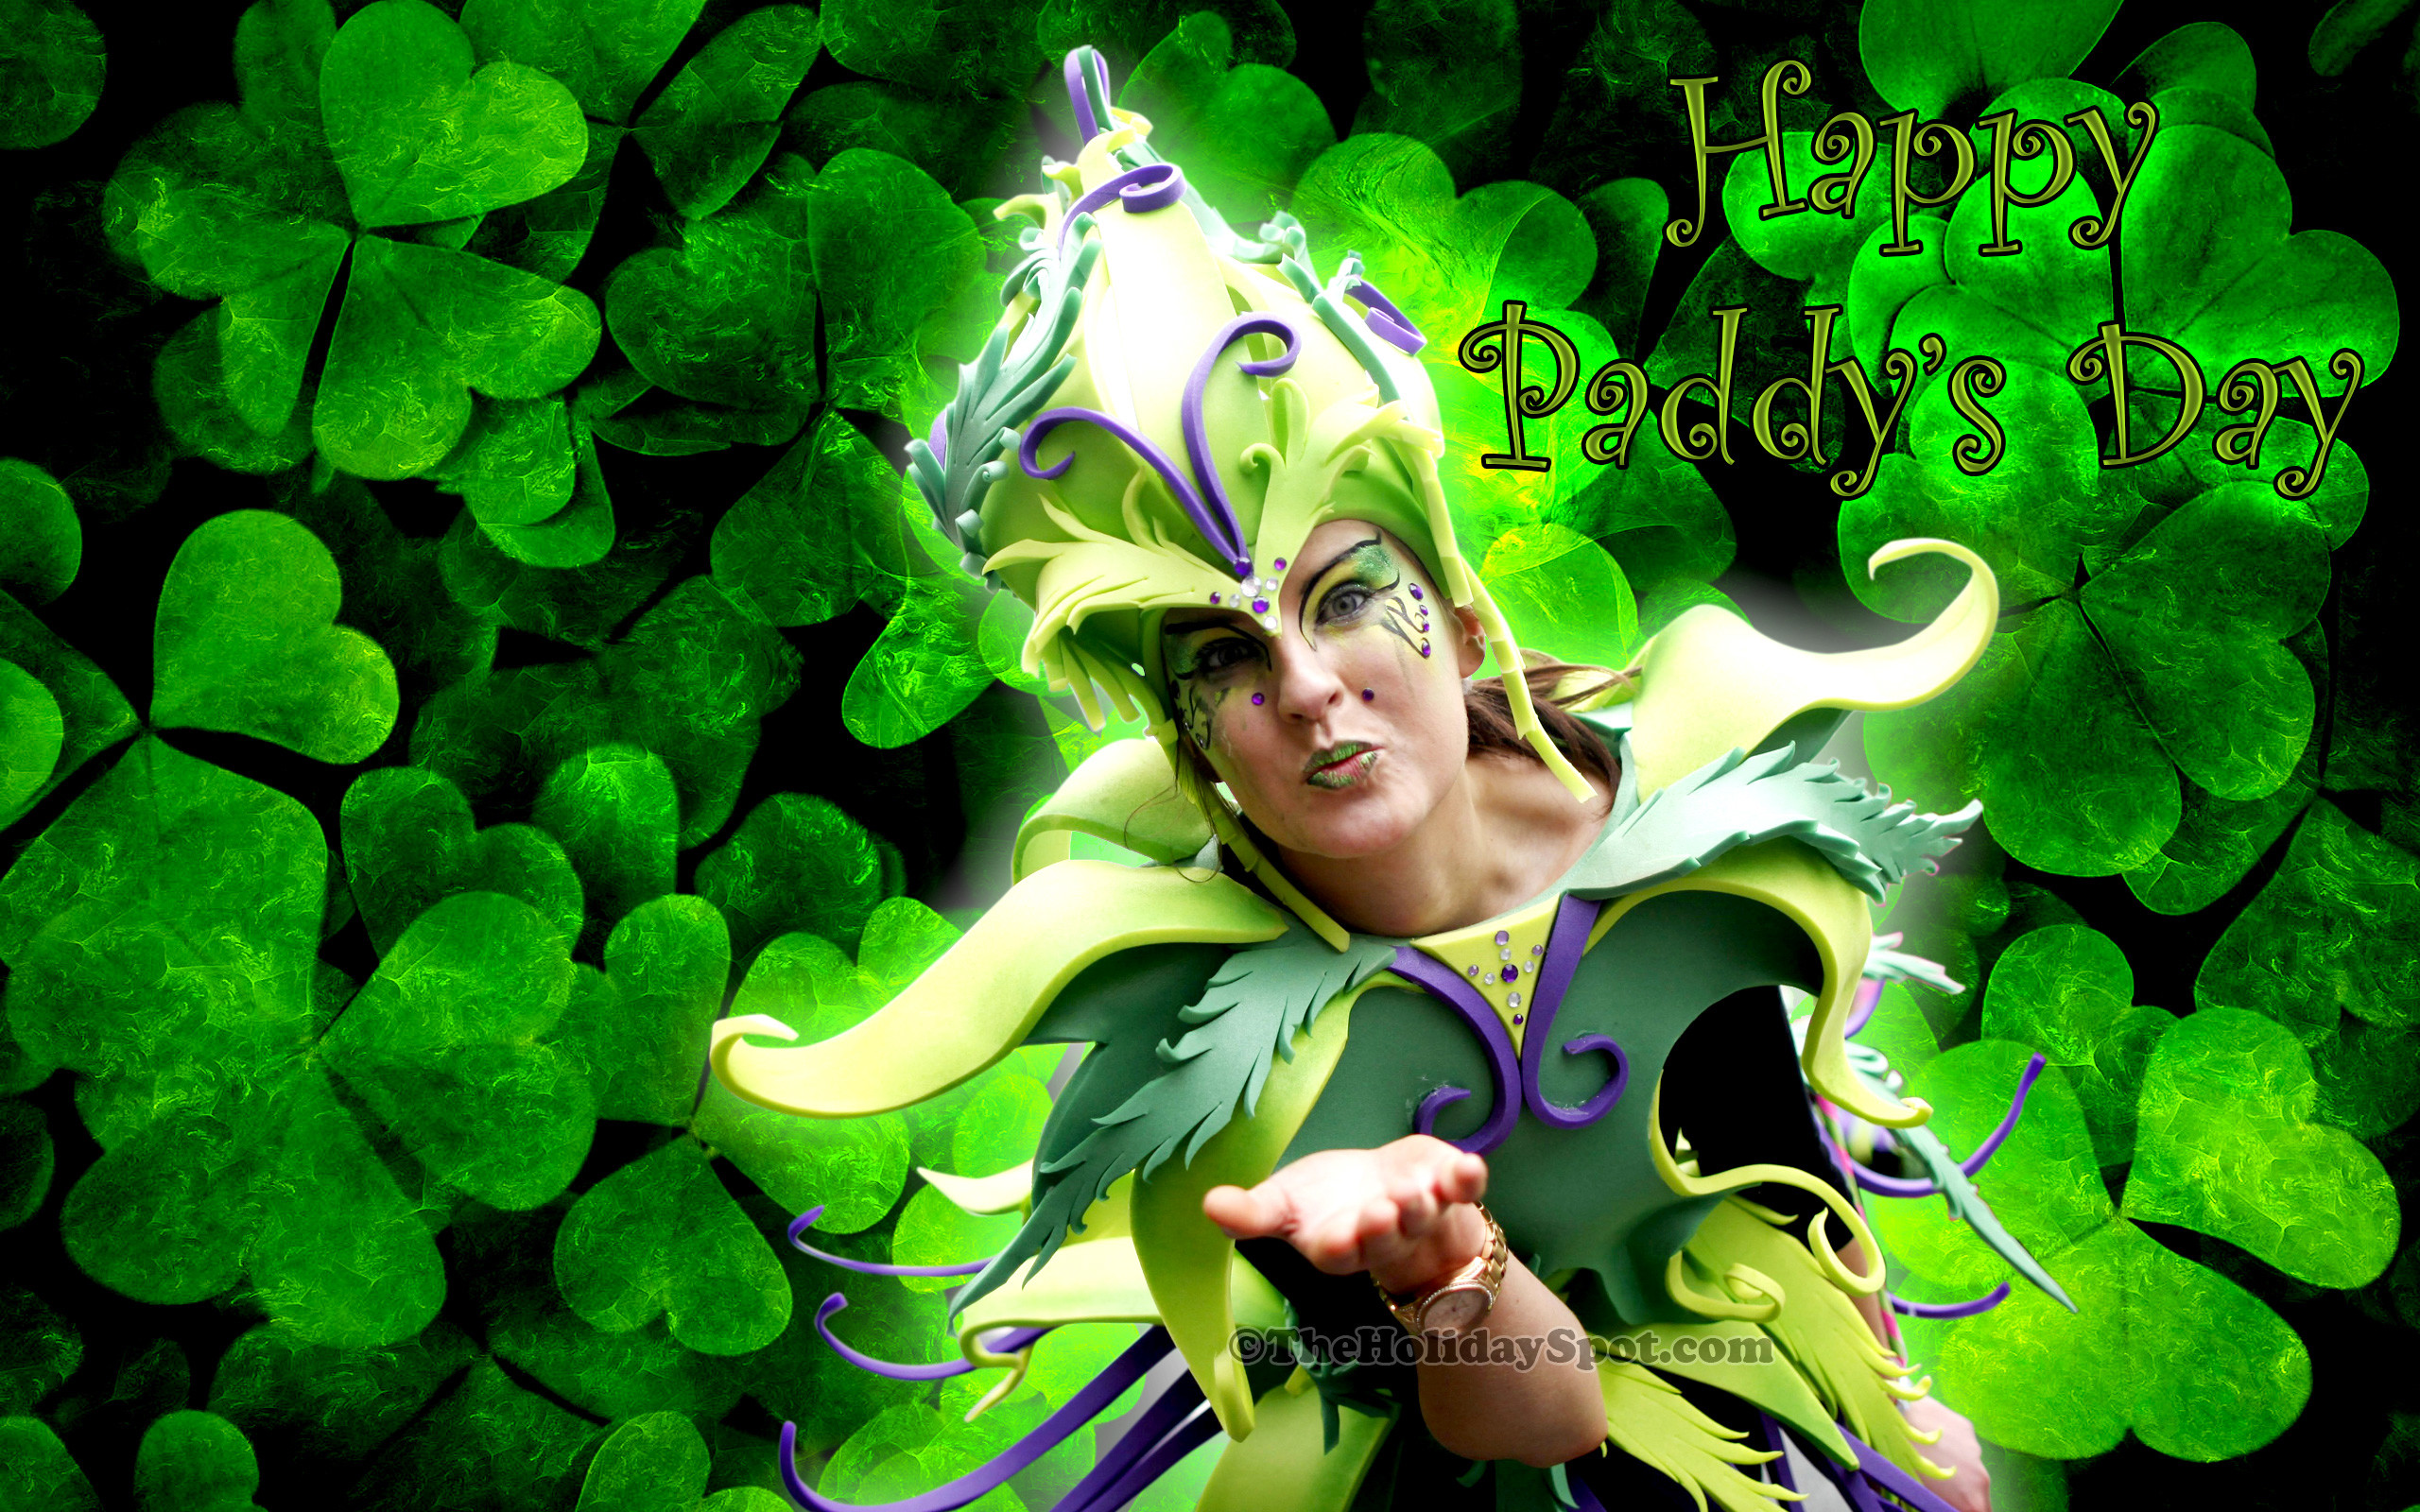 2560x1600 A woman dressed in green outfit wishing Happy Paddys Day wallpaper.